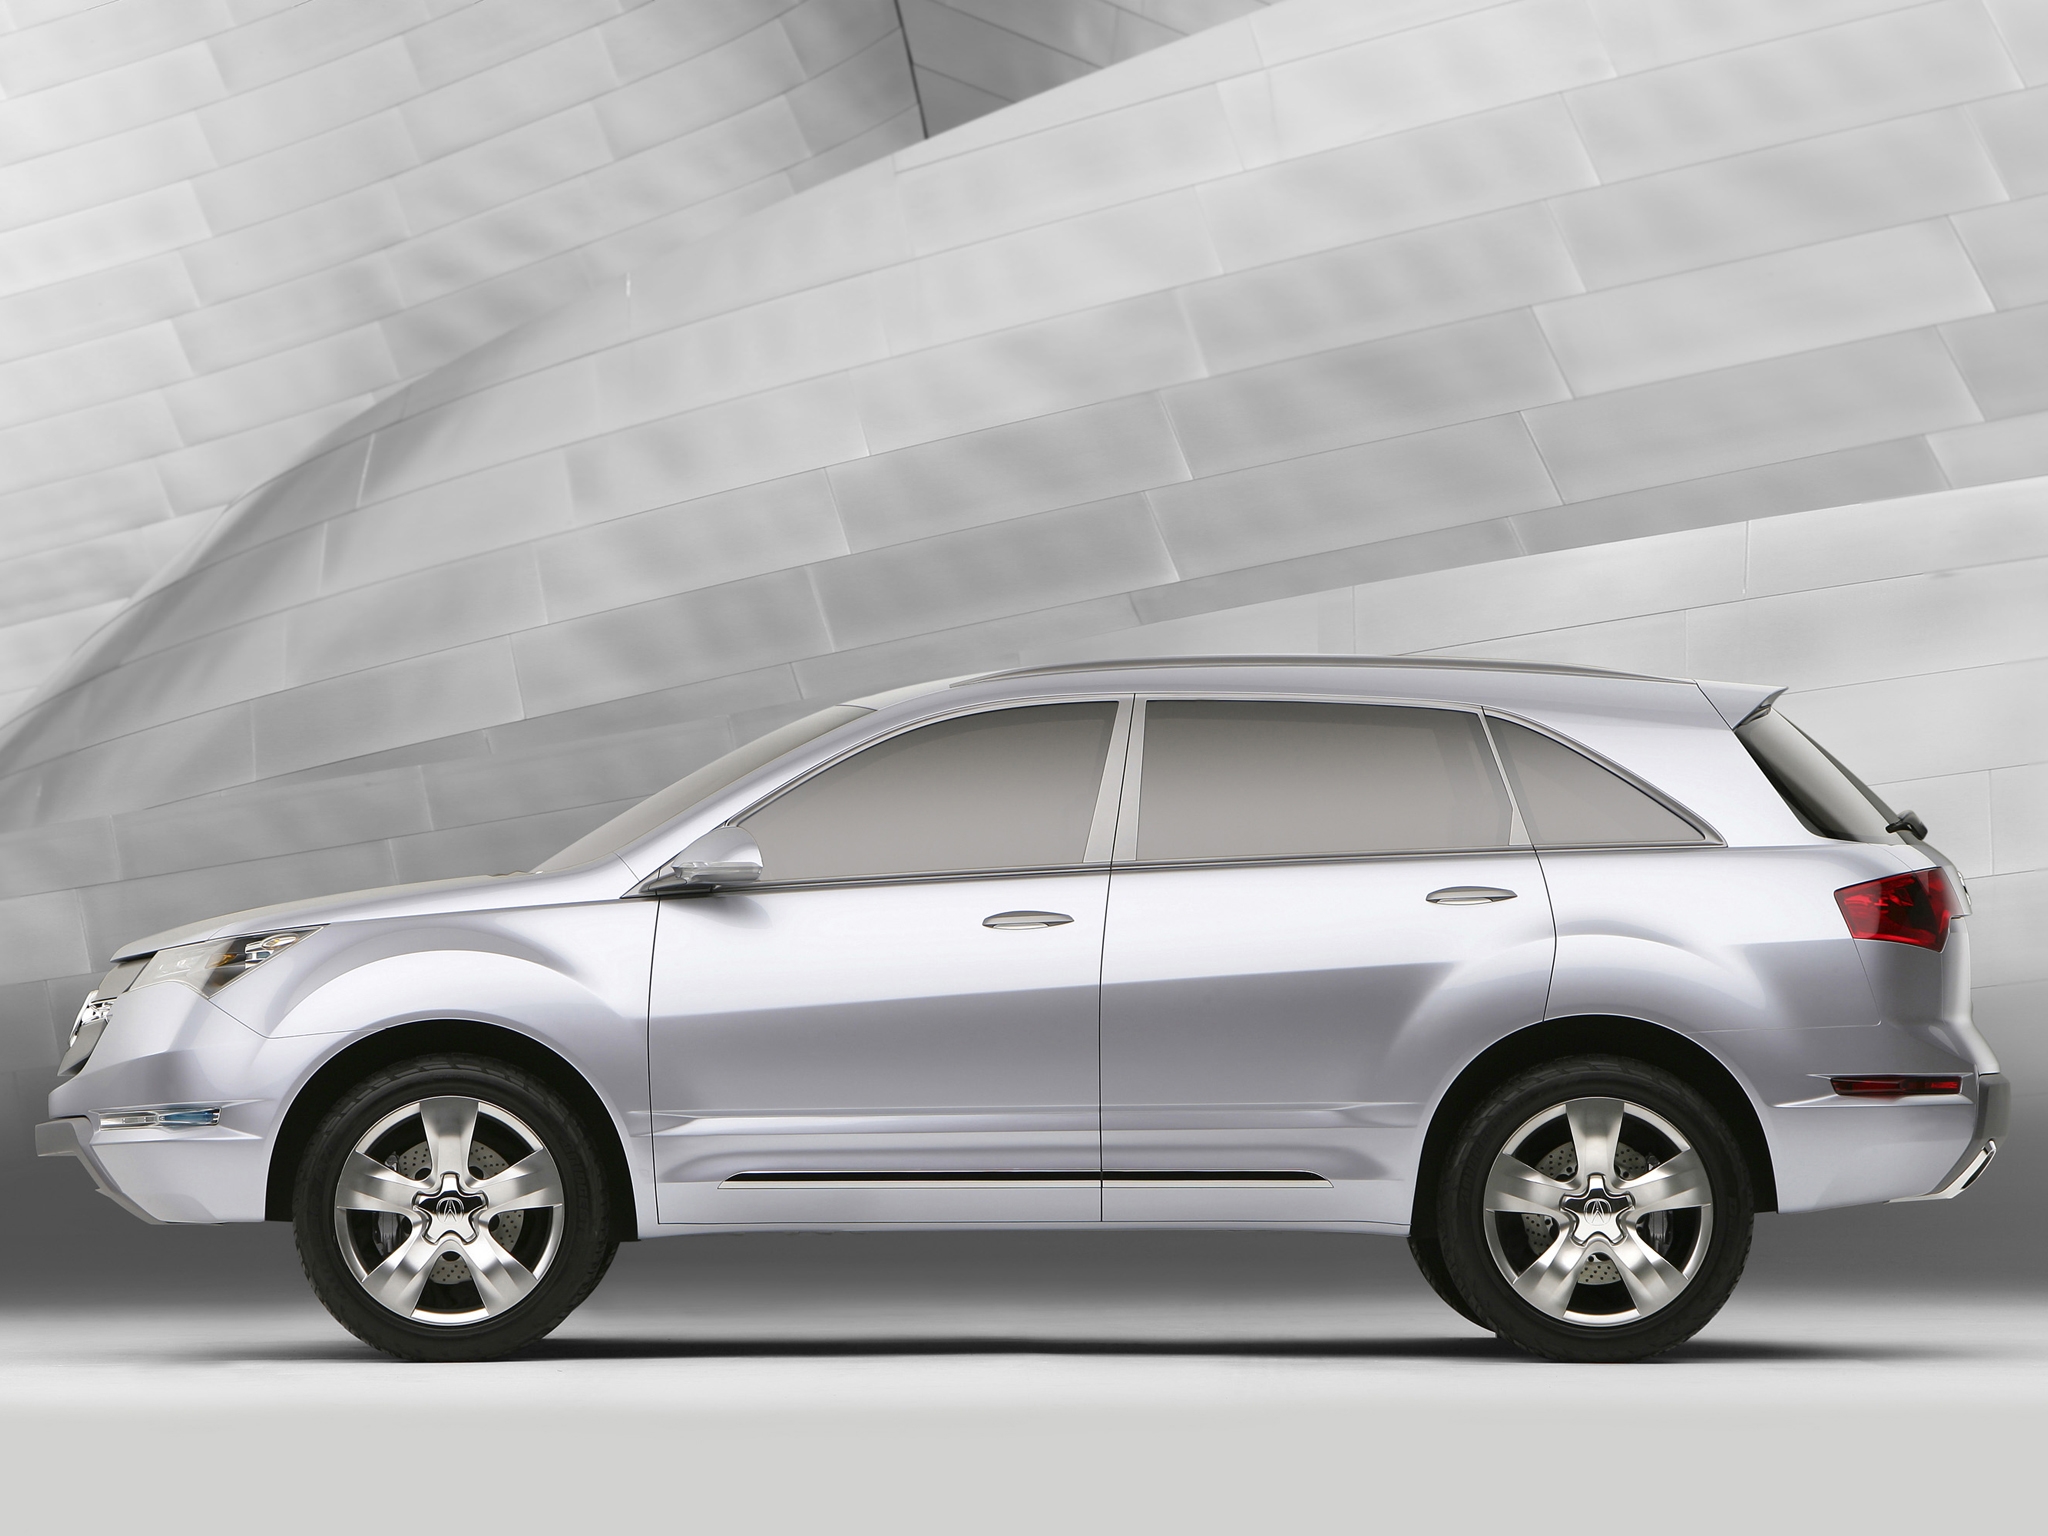 acura, cars, white, jeep, concept, side view, style, concept car, 2006, mdx 32K